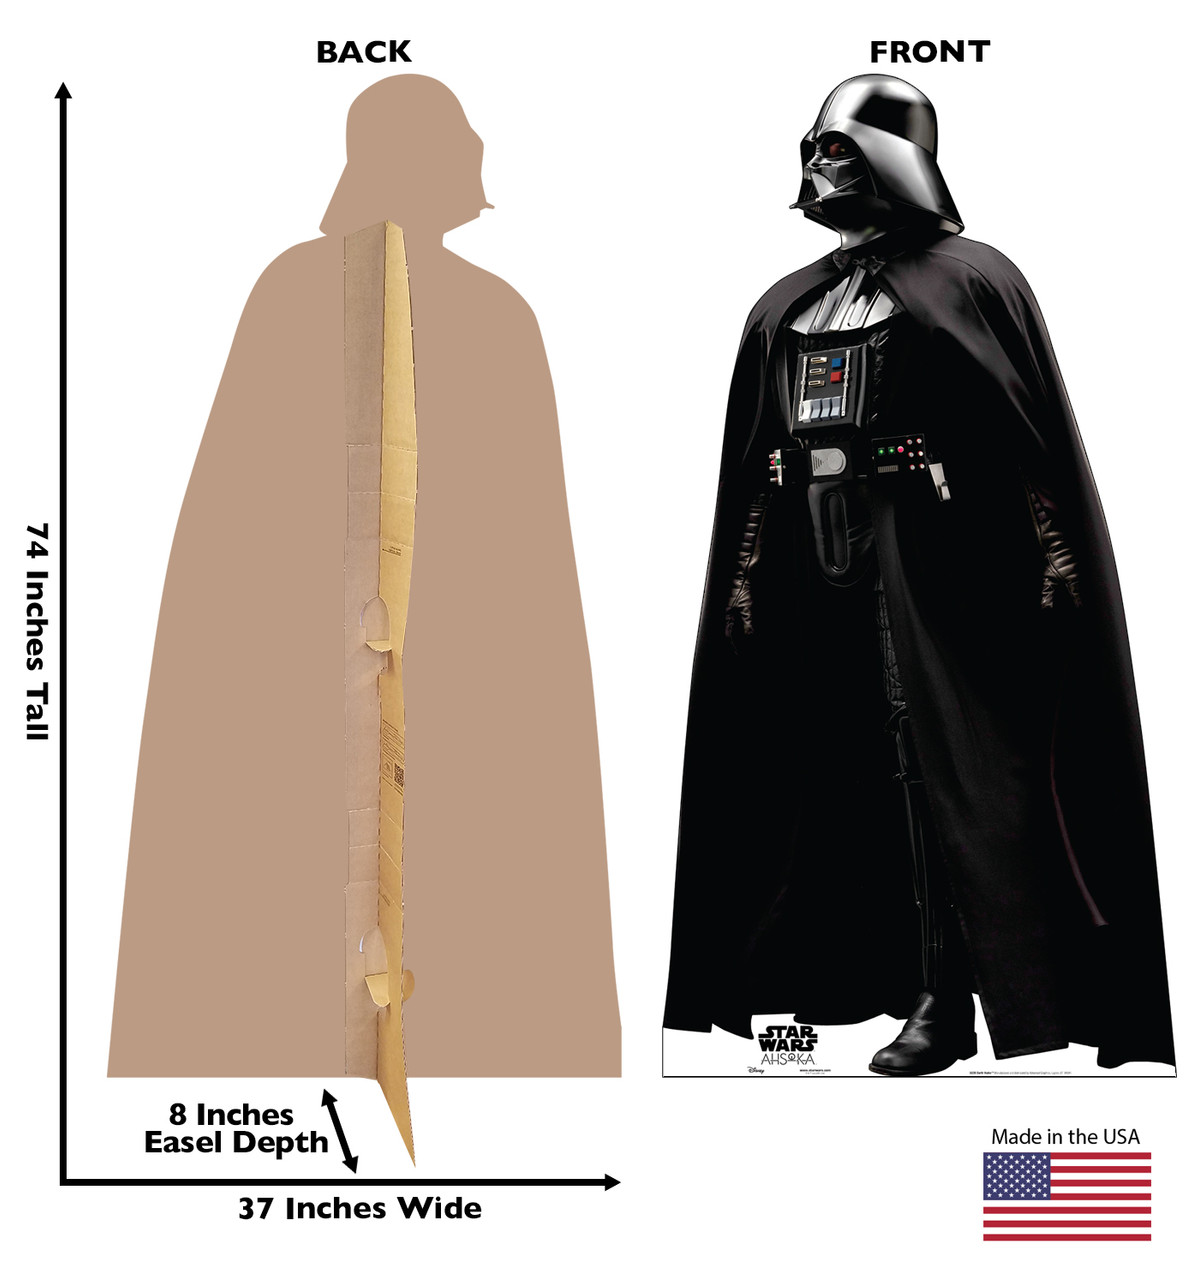 Life-size cardboard standee of Darth Vader with back and front dimensions.